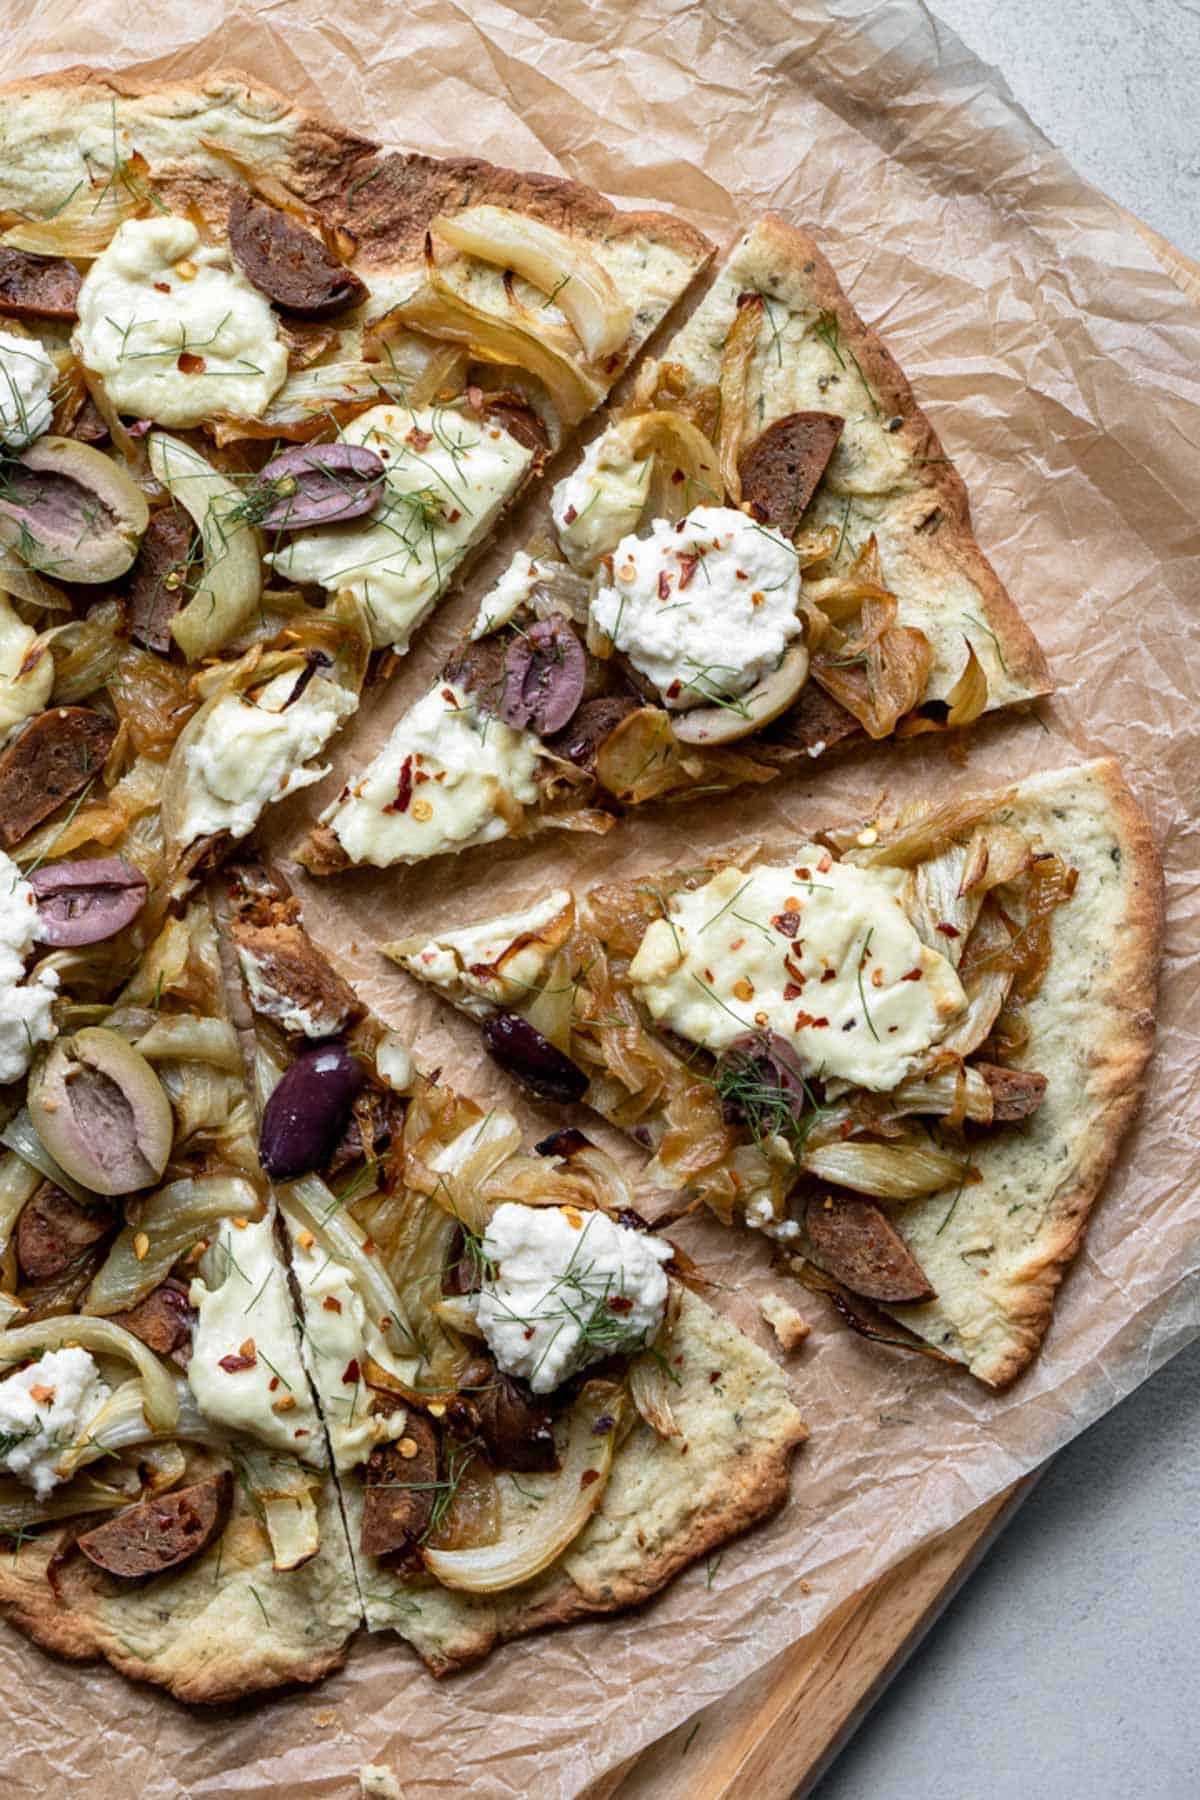 fennel and ricotta pizza with olives and sausage on a cutting board.